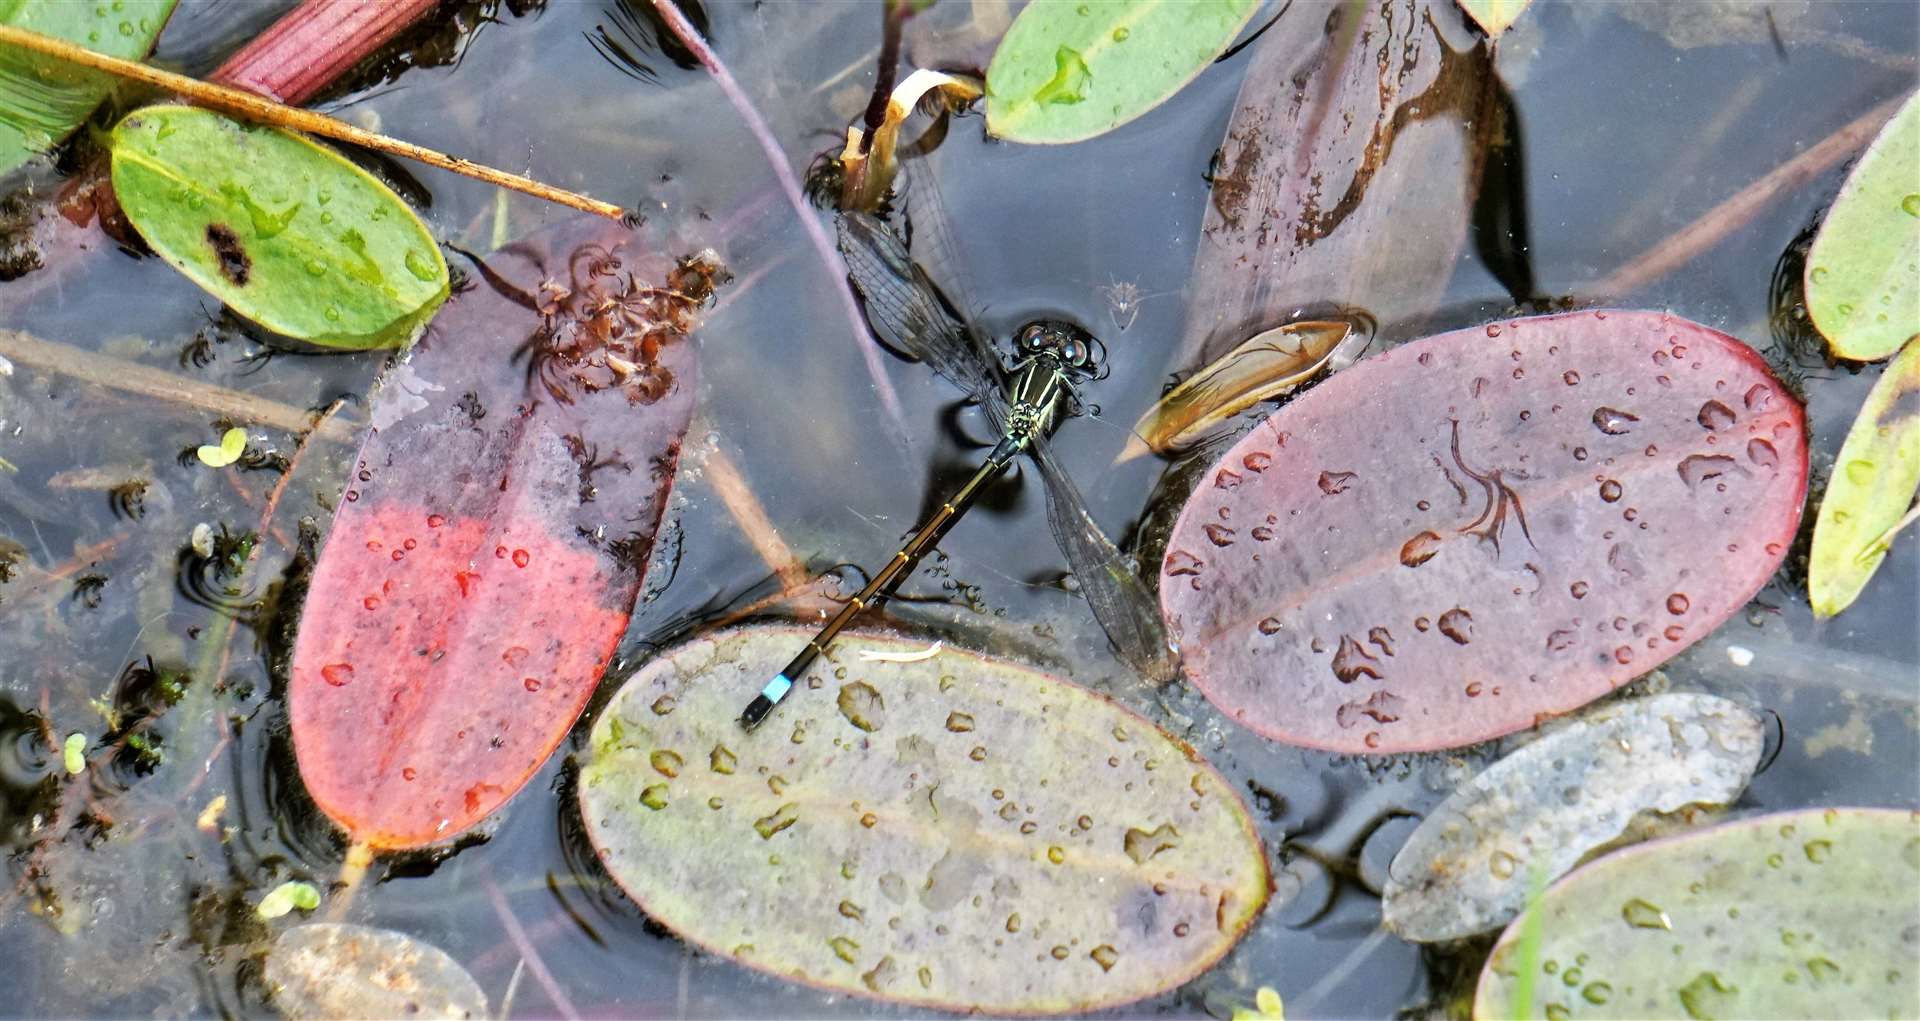 A damselfly that the children spotted in the pond. Picture: DGS